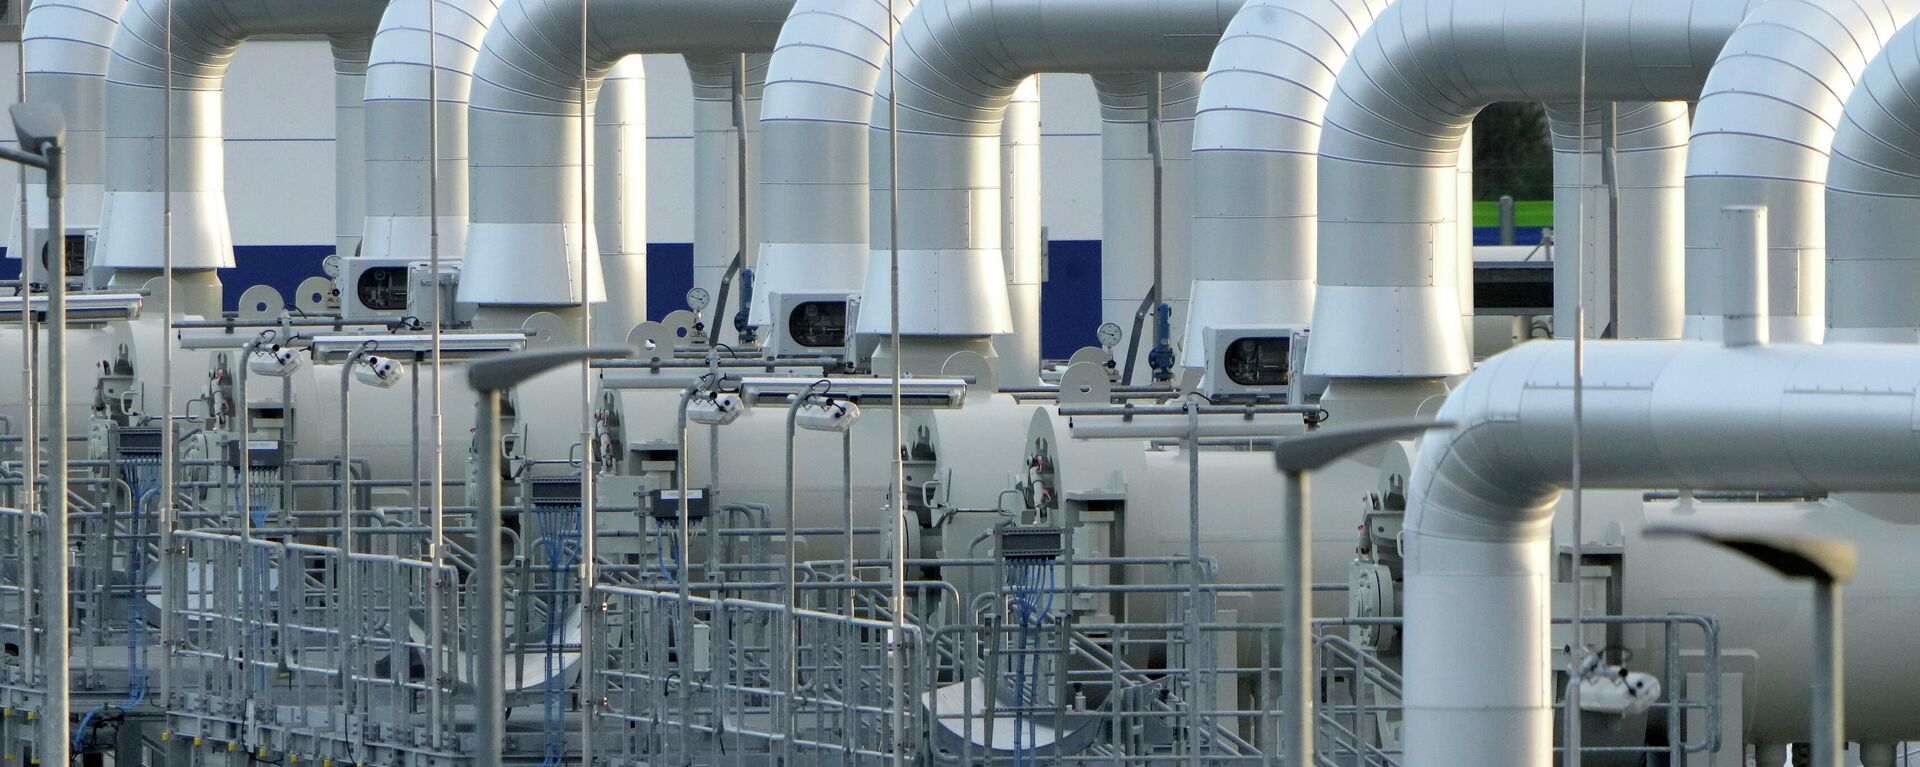 FILE - Pipes at the landfall facilities of the 'Nord Stream 2' gas pipline are pictured in Lubmin, northern Germany, Tuesday, Feb. 15, 2022 - Sputnik International, 1920, 20.07.2022